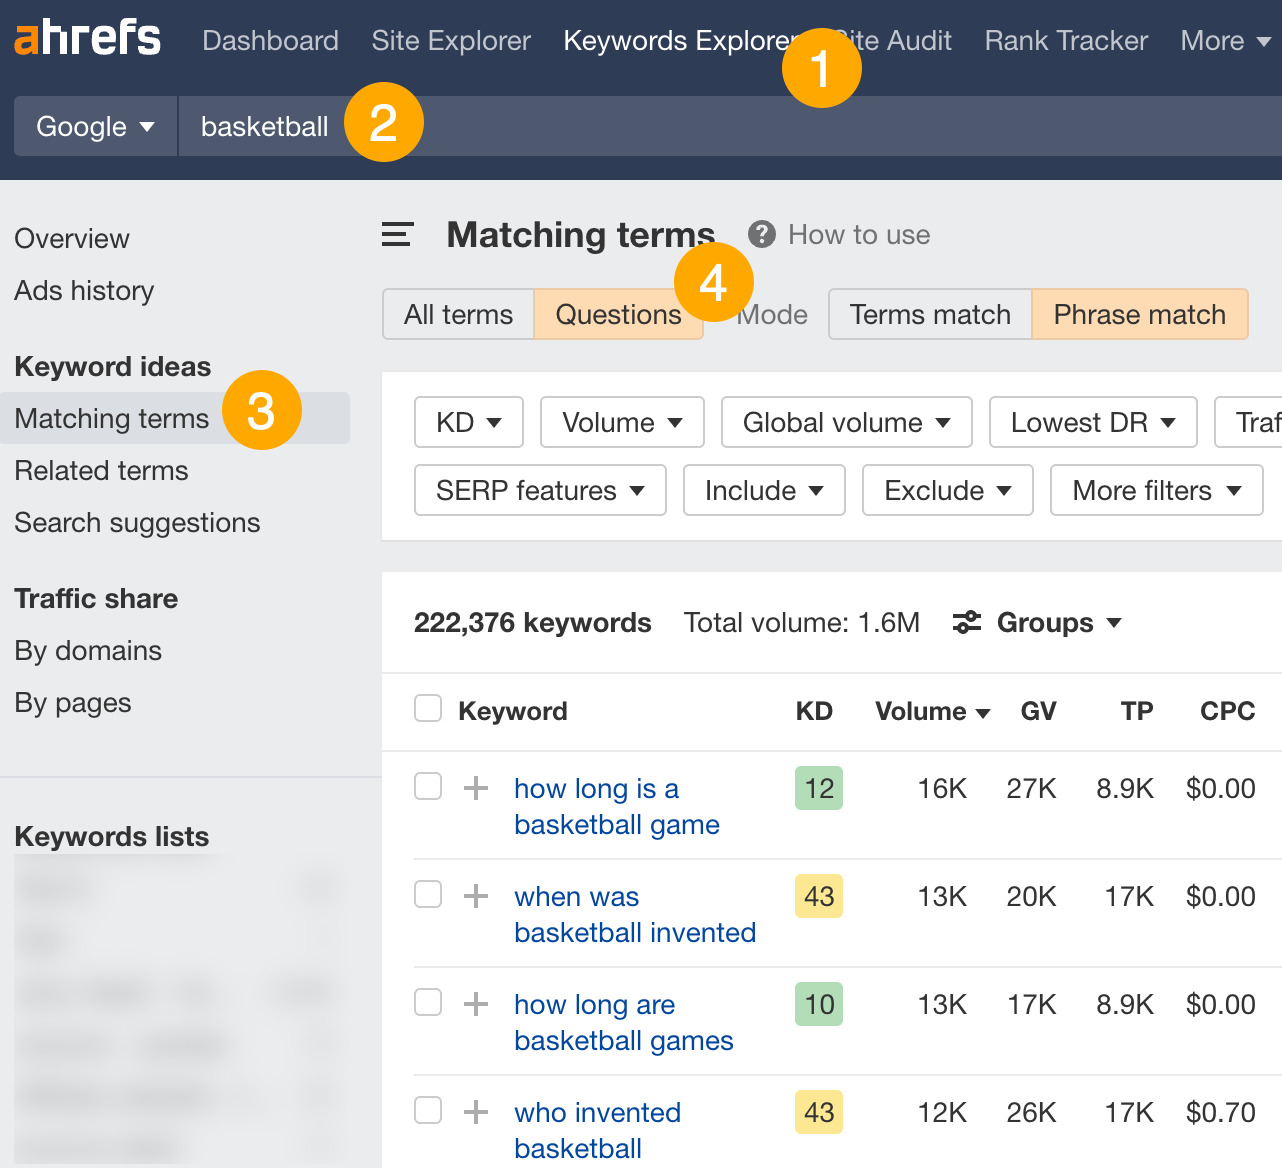 Matching terms report with "Questions" tab toggled, via Ahrefs' Keywords Explorer